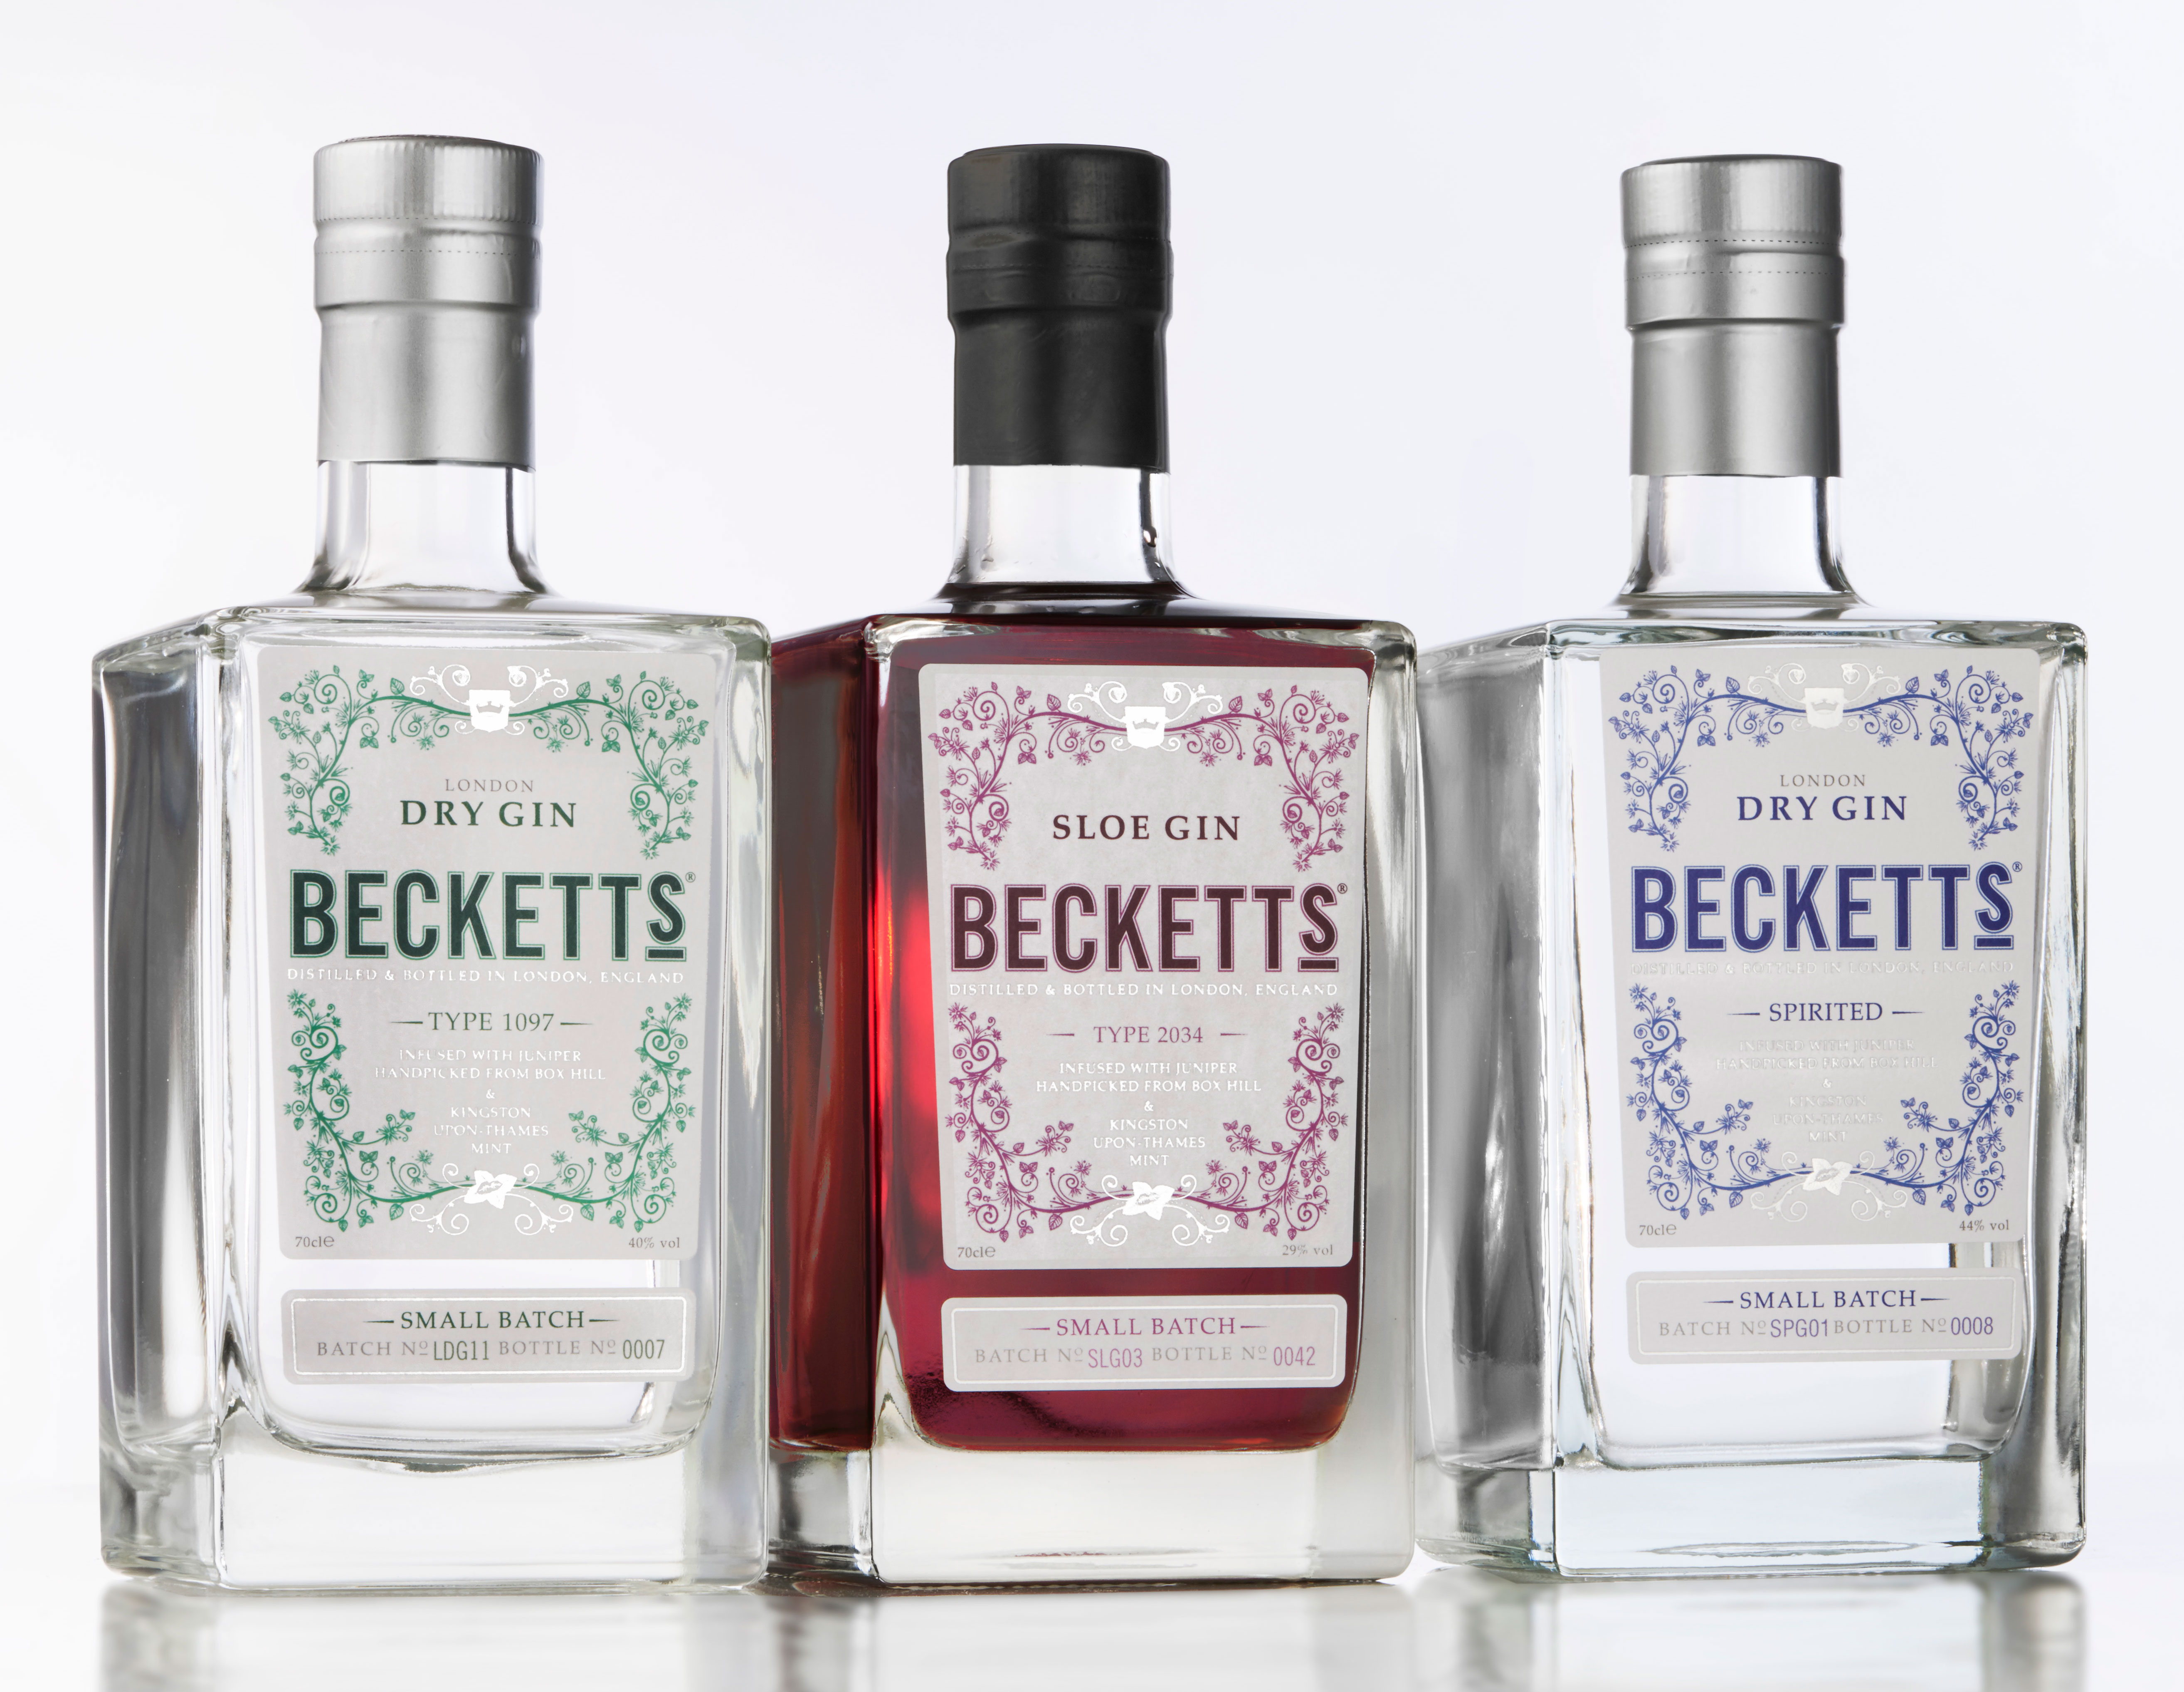 Becketts Gin bottles Spirited, Sloe Gin and London Gin on a white background